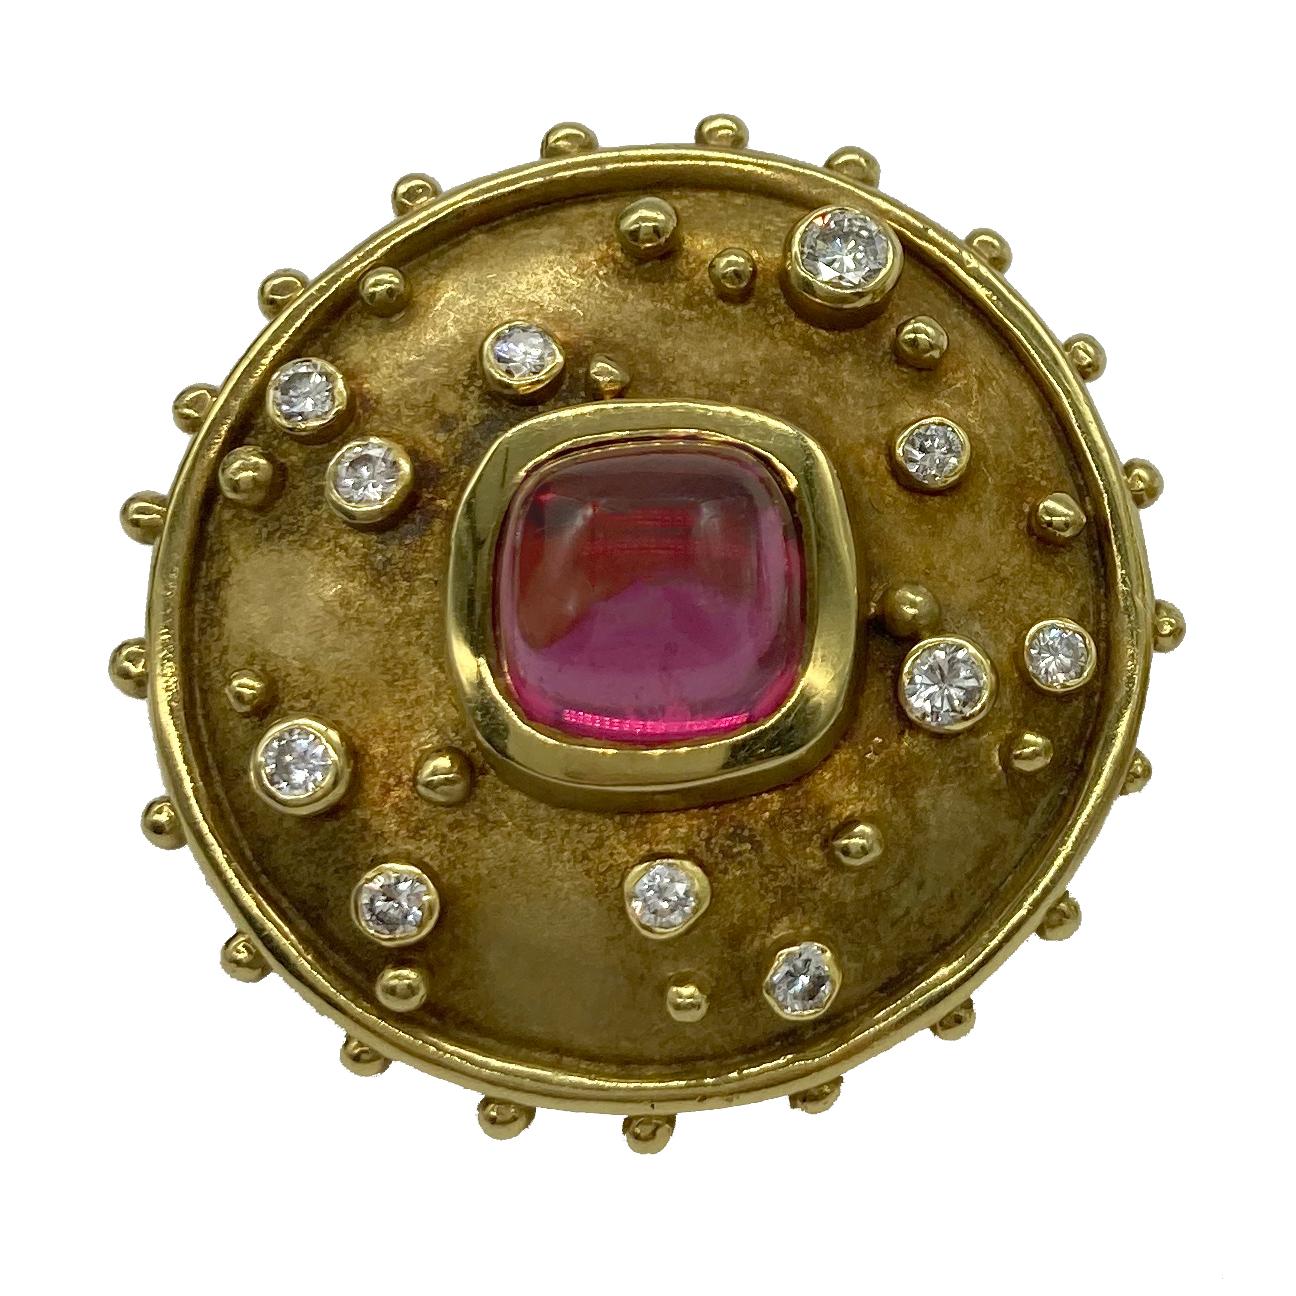 A chic pair of 18 karat yellow gold earclips centering cabochon tourmalines and embellished with diamonds.